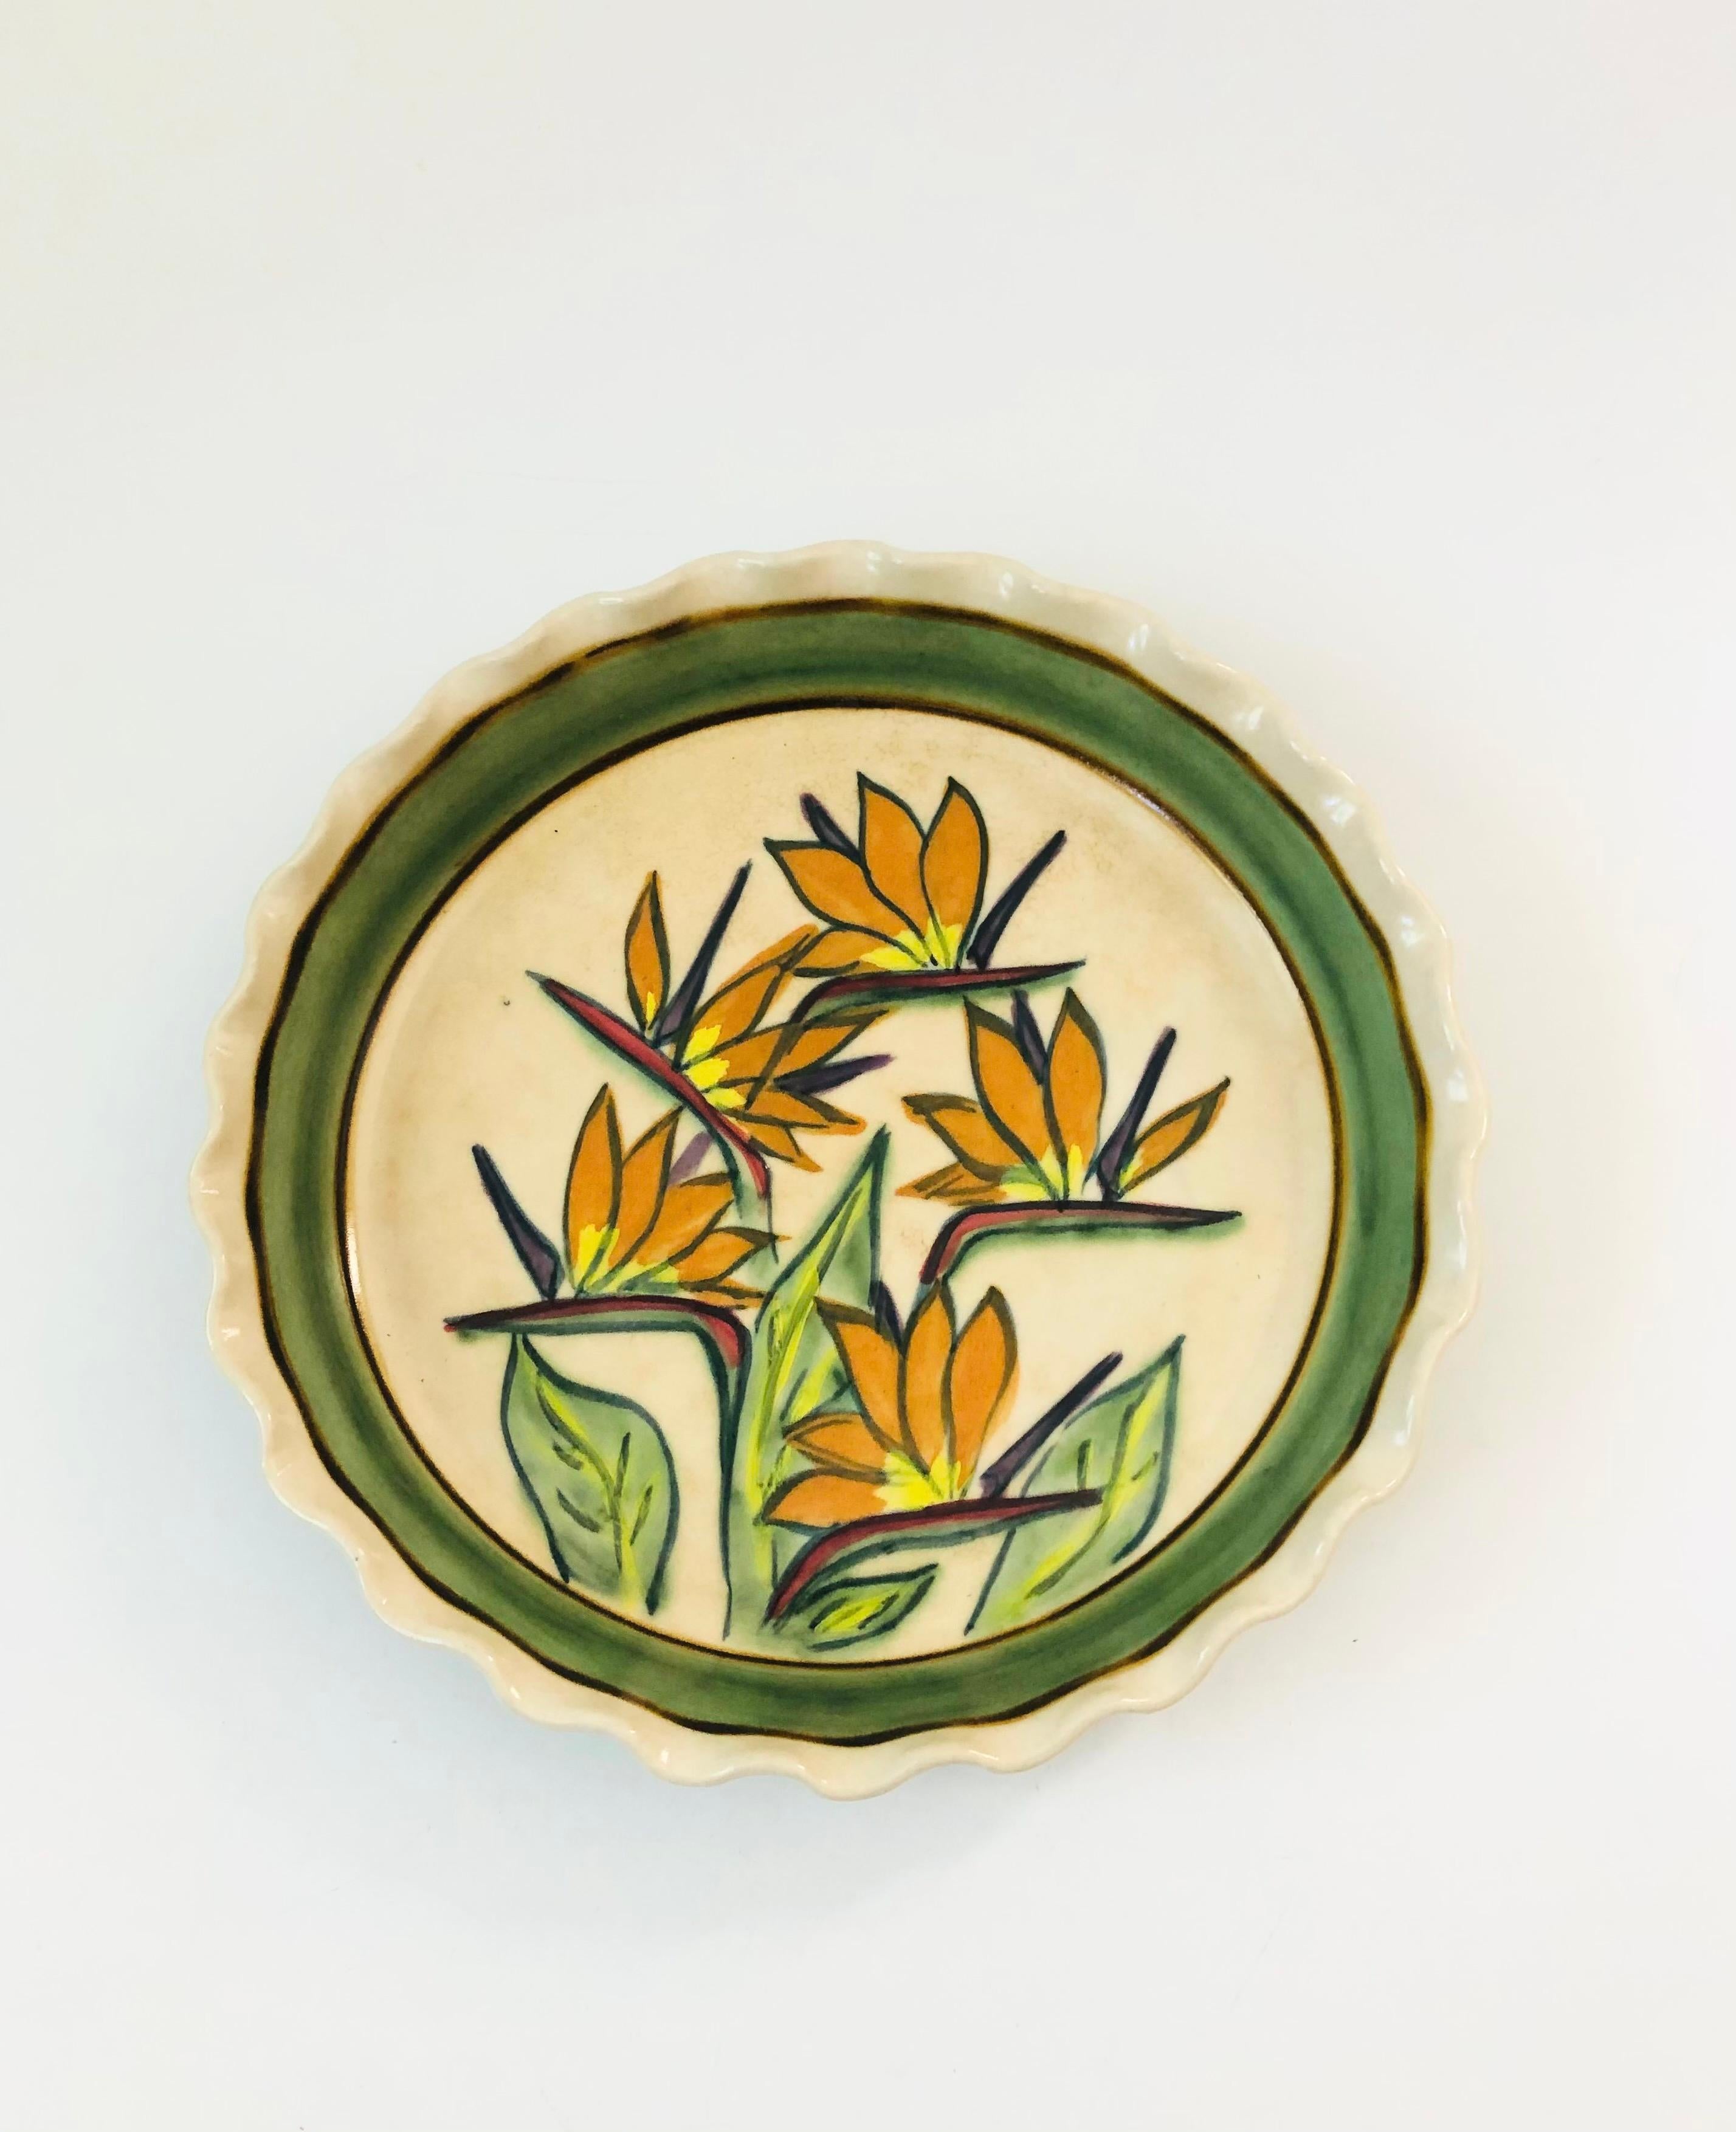 A vintage studio pottery circular pie dish with a beautiful handpainted design in the center of birds of paradise. Lovely curvy edge to the dish. Signed on the base by Adams.

